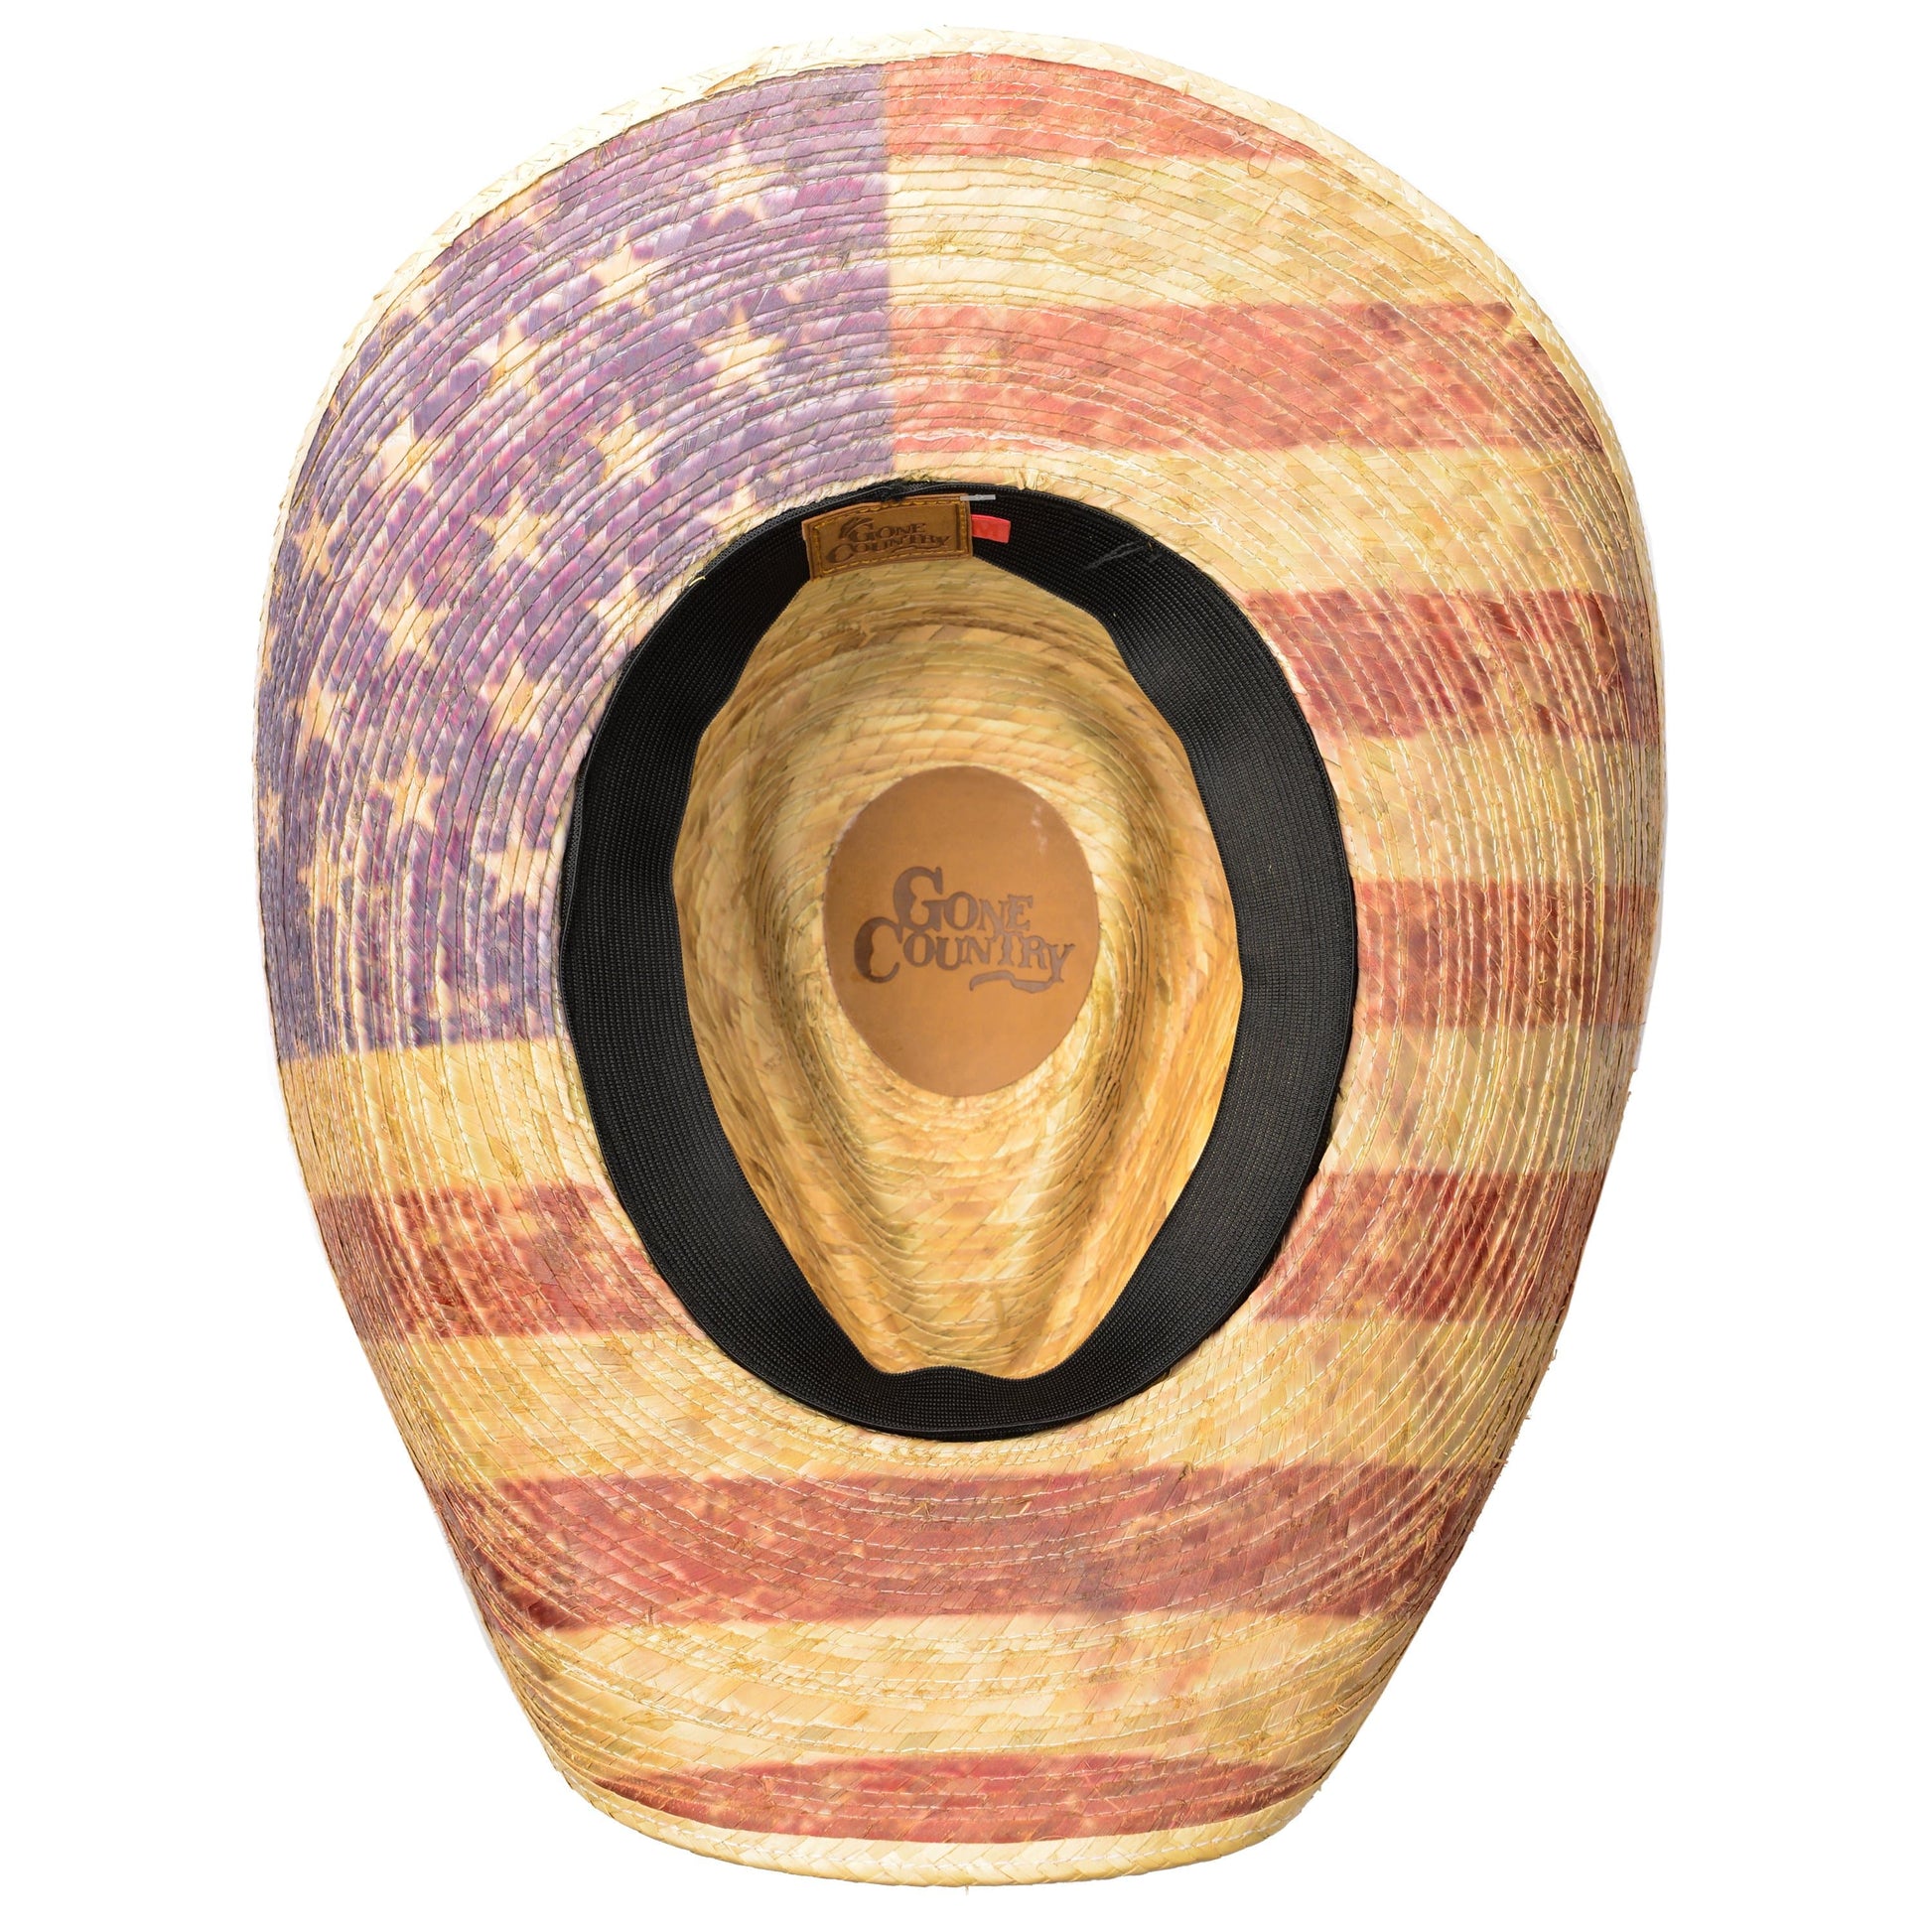 American flag printed on a palm straw hat